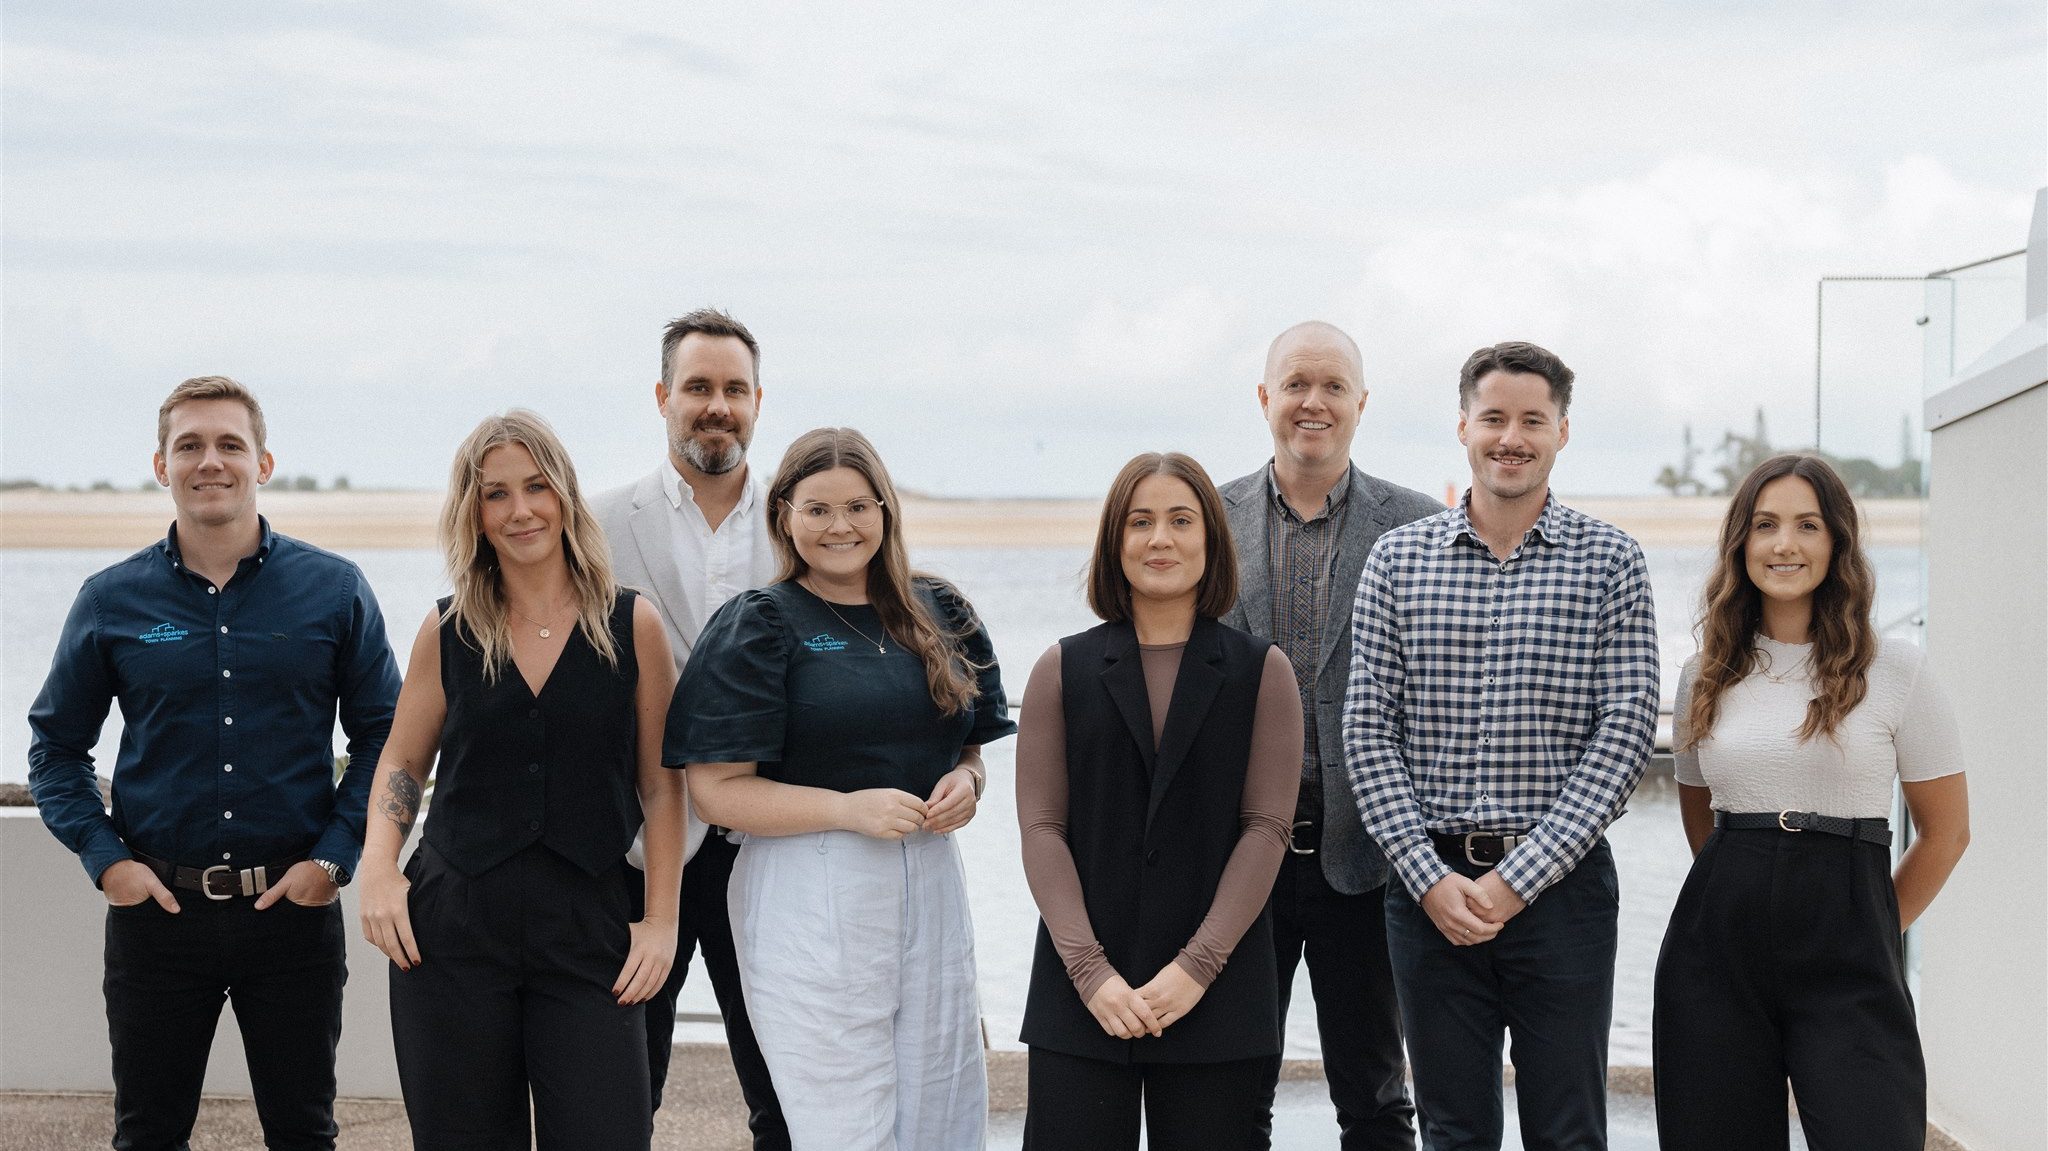 The ASTP team (pictured in a casual group photo with Cotton Tree in the background) are here to help with the Incentivising Infill Development Fund.